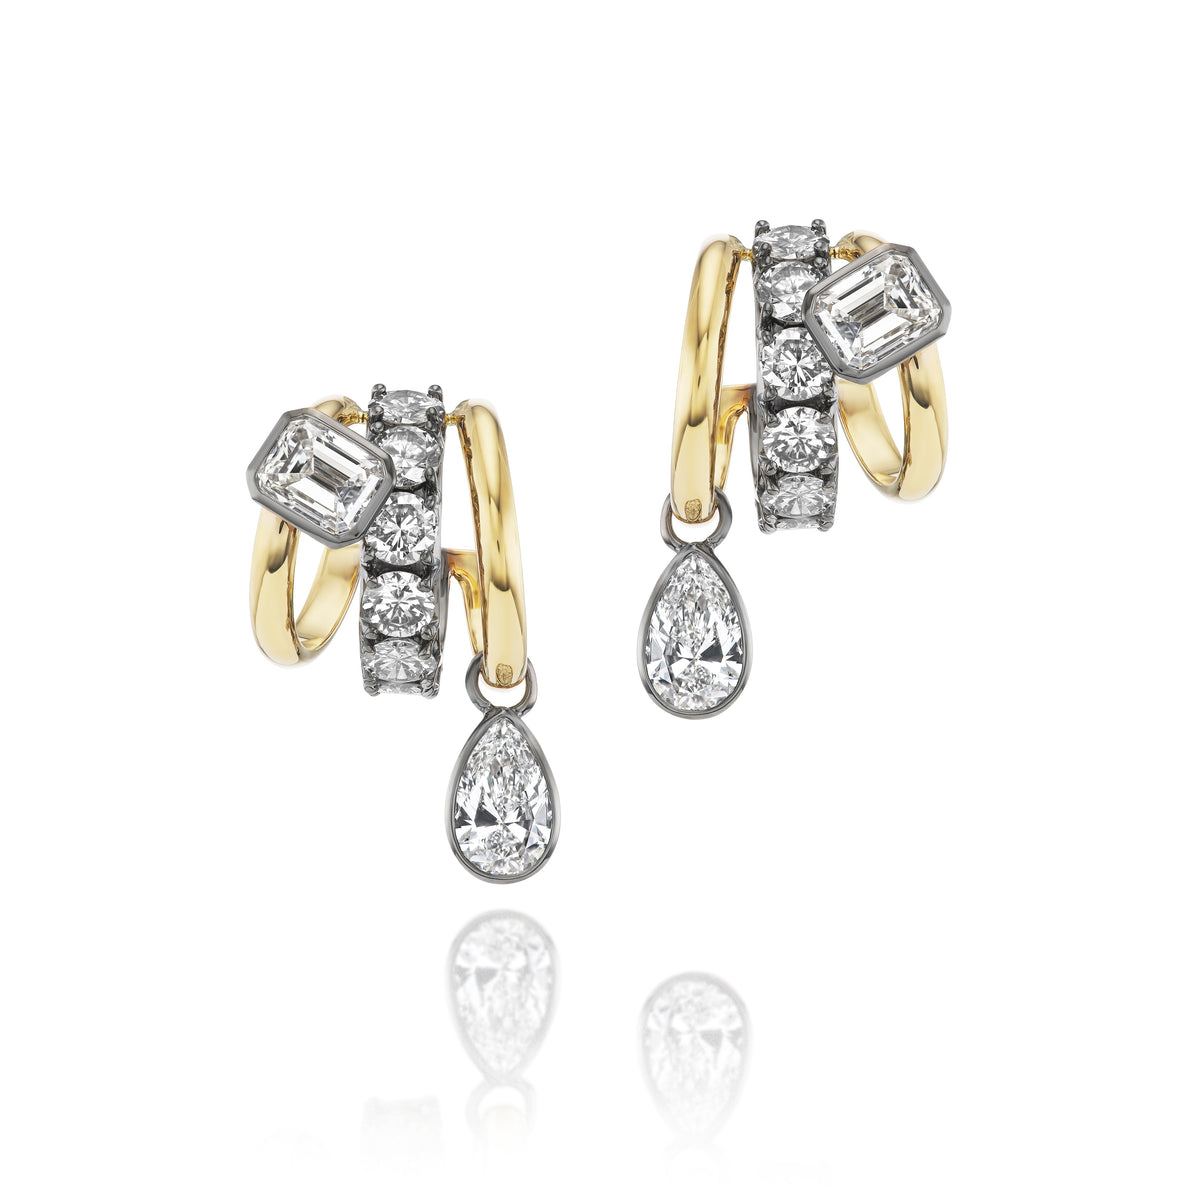 Huggie Earrings in Yellow Gold and Black Plated Yellow Gold with Round, Emerald Cut, and Pear Shape Diamonds